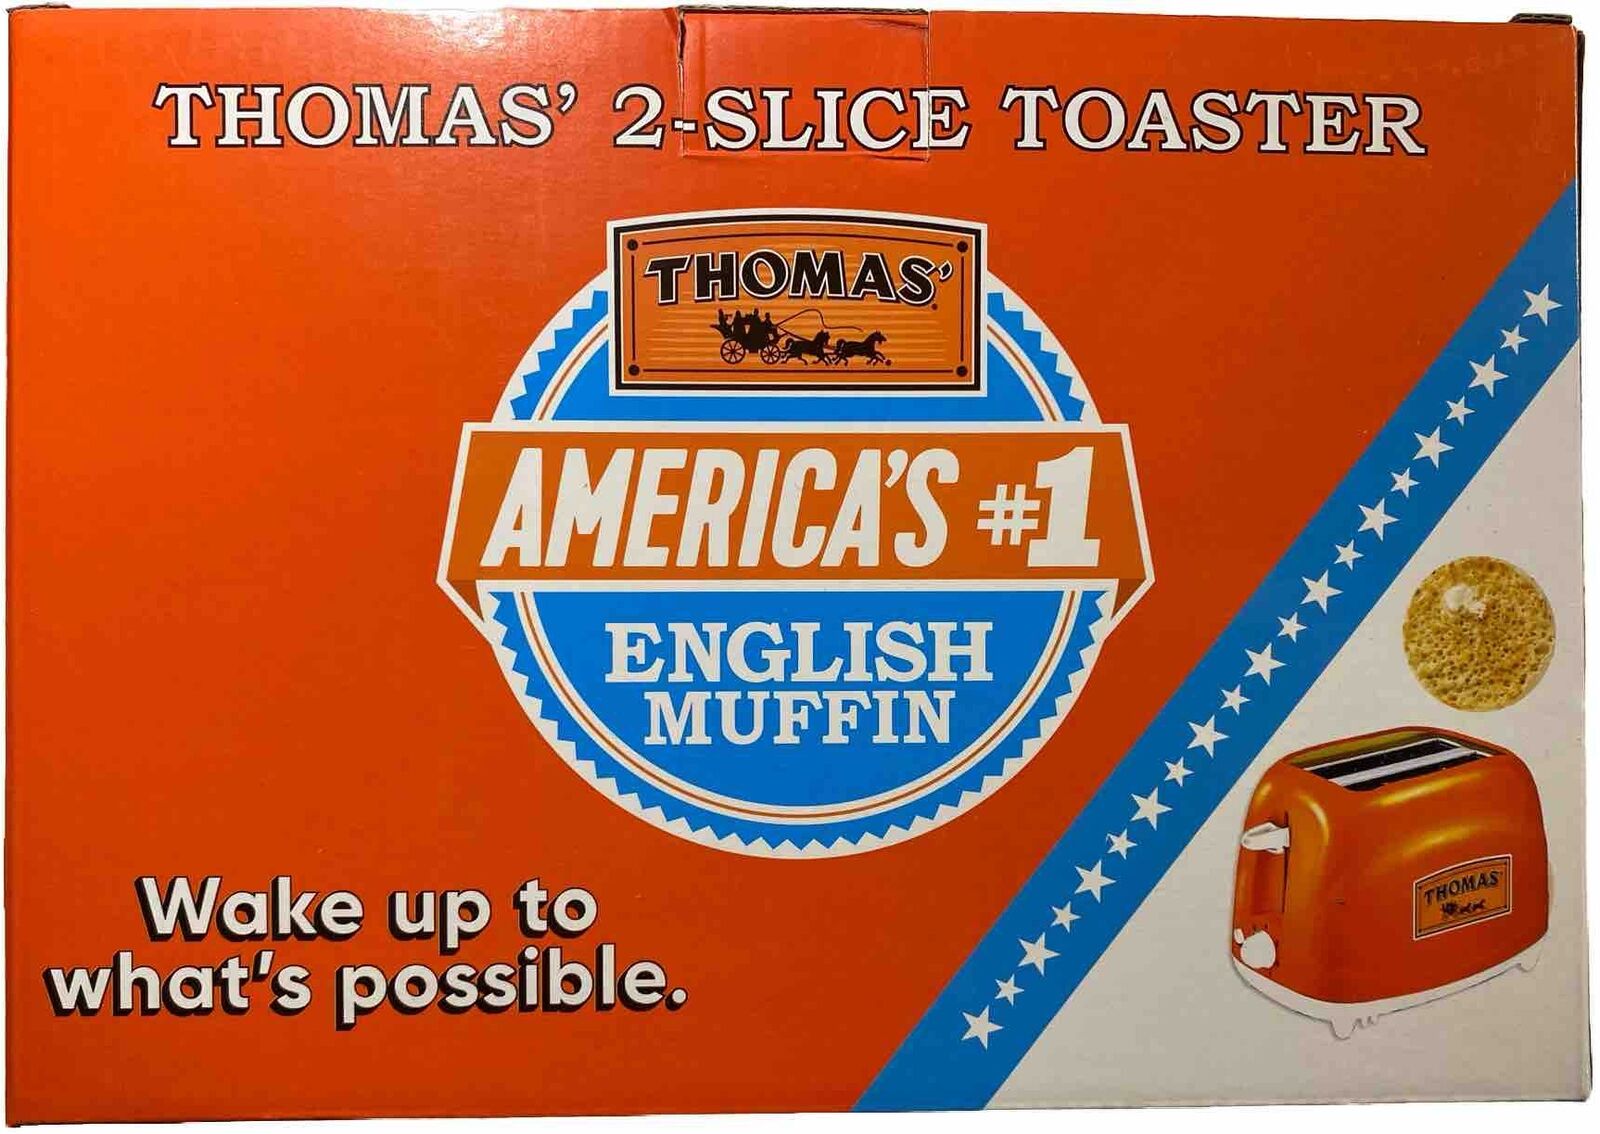 Rare Limited Edition Promotional Orange Thomas Toaster Not Sold In Stores